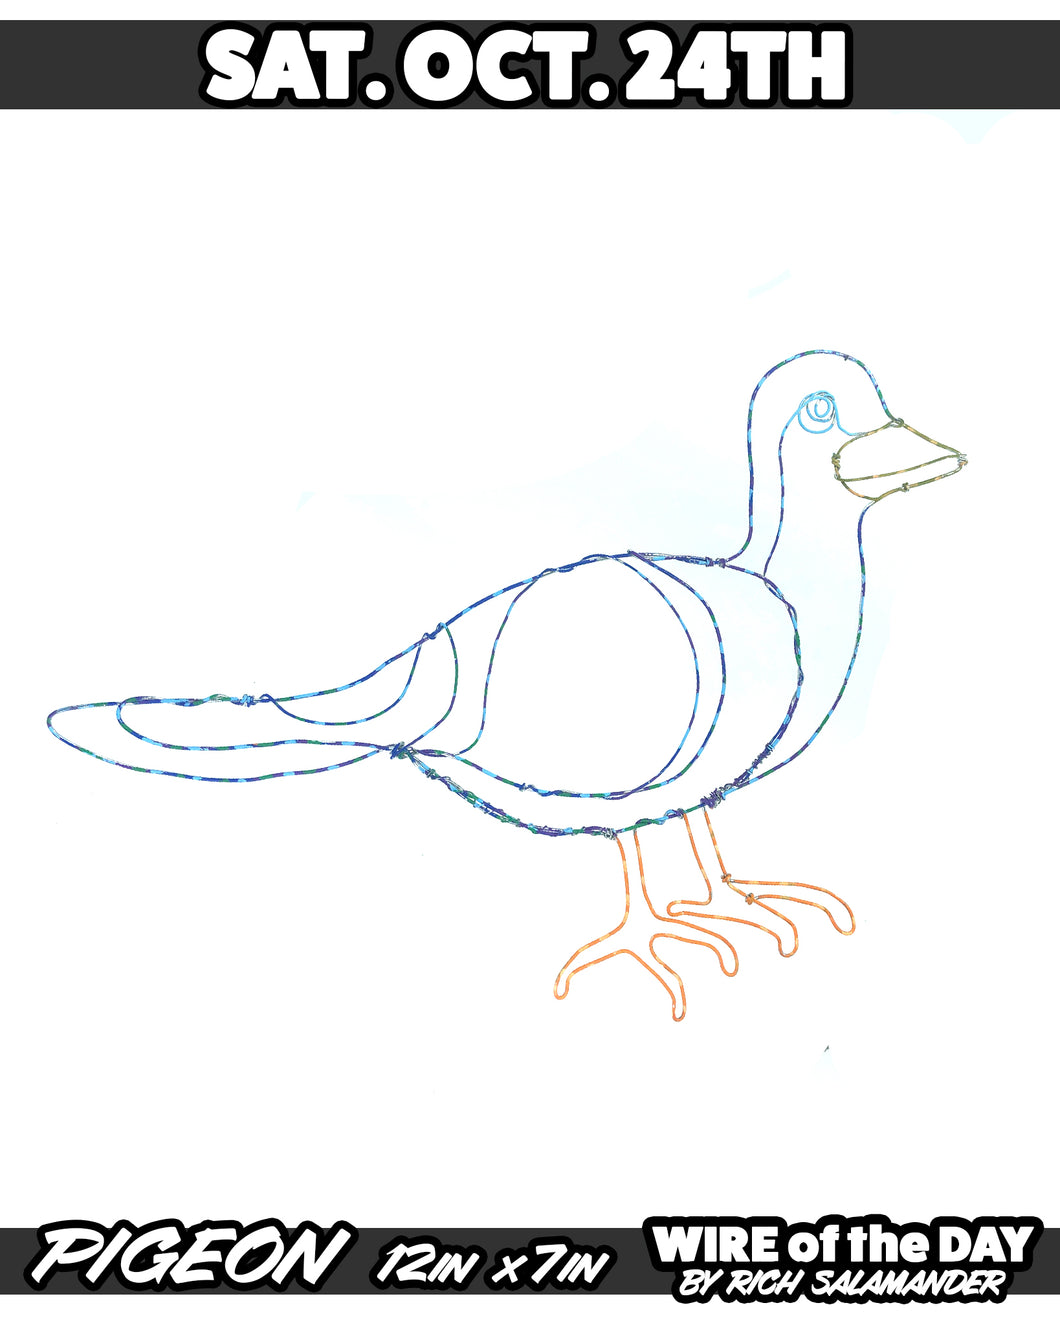 WIRE of the DAY PIGEON